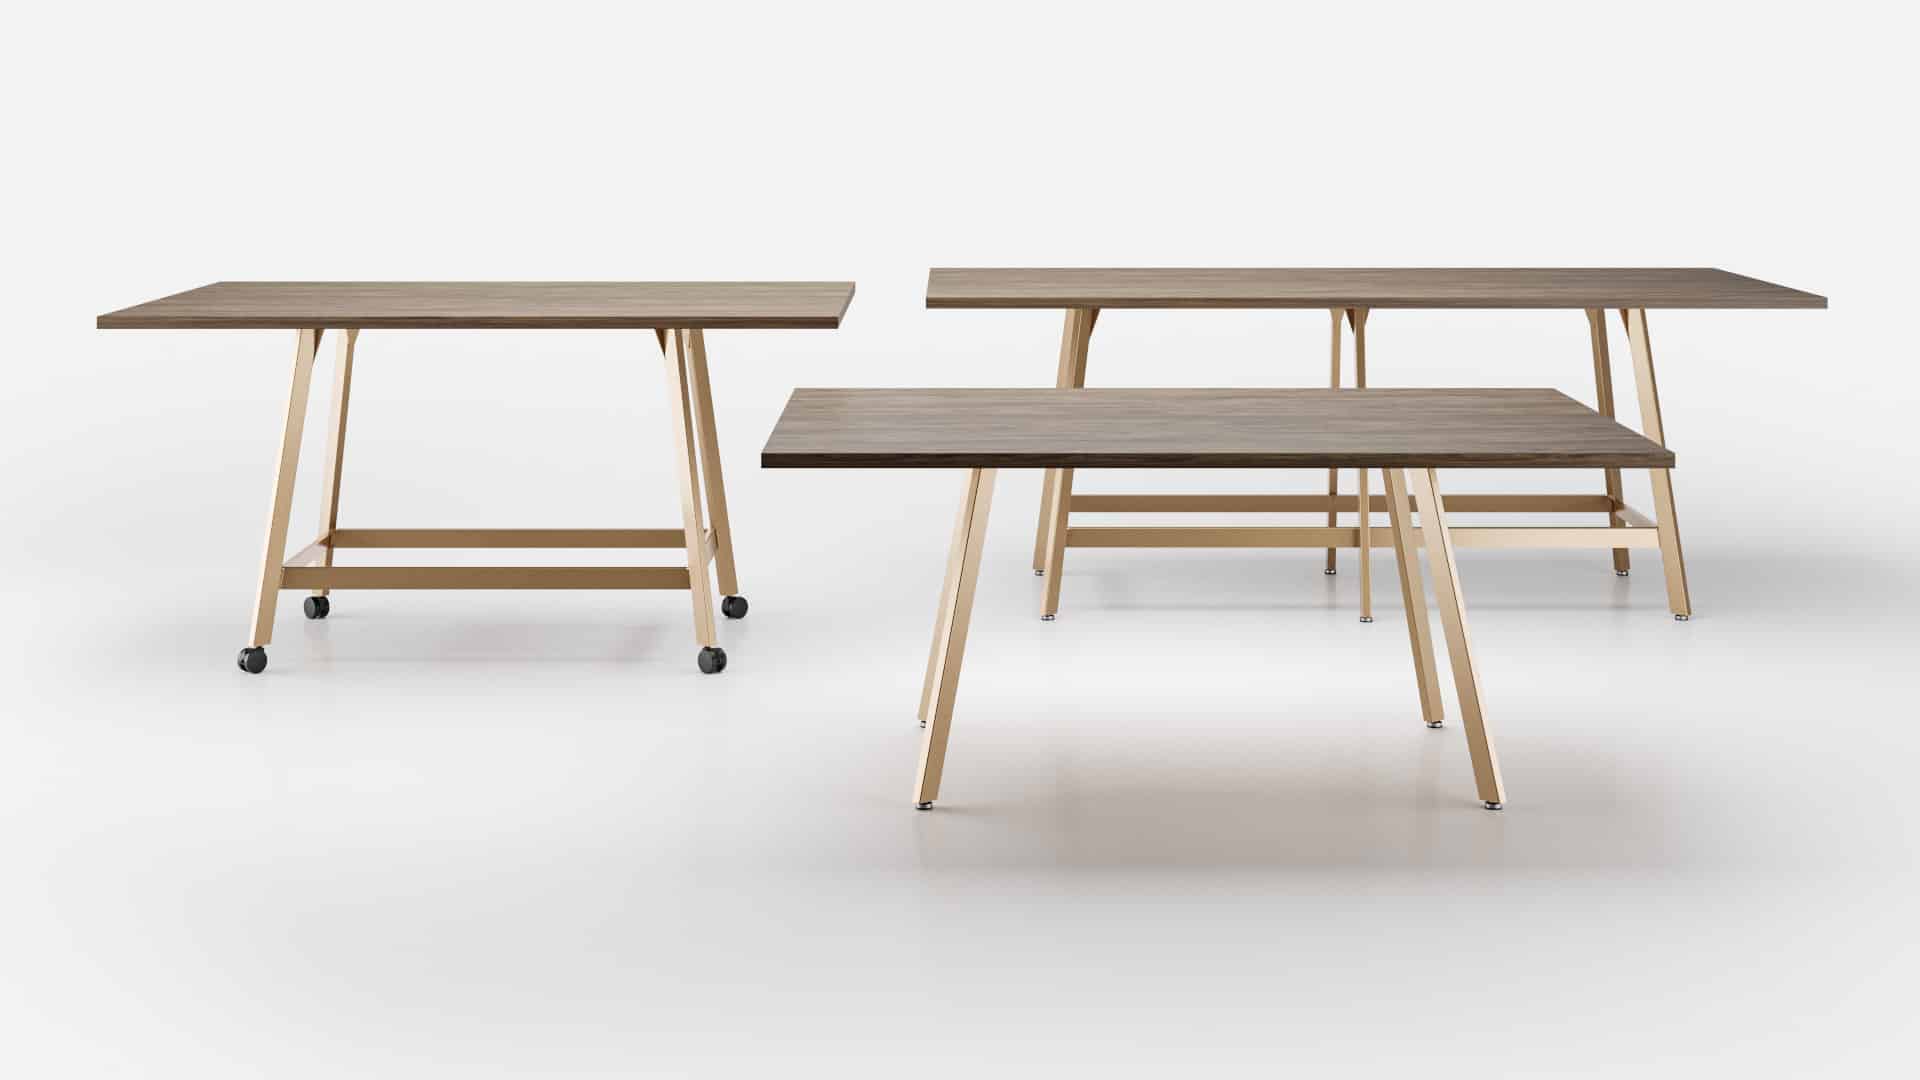 NIM collection collaboration tables